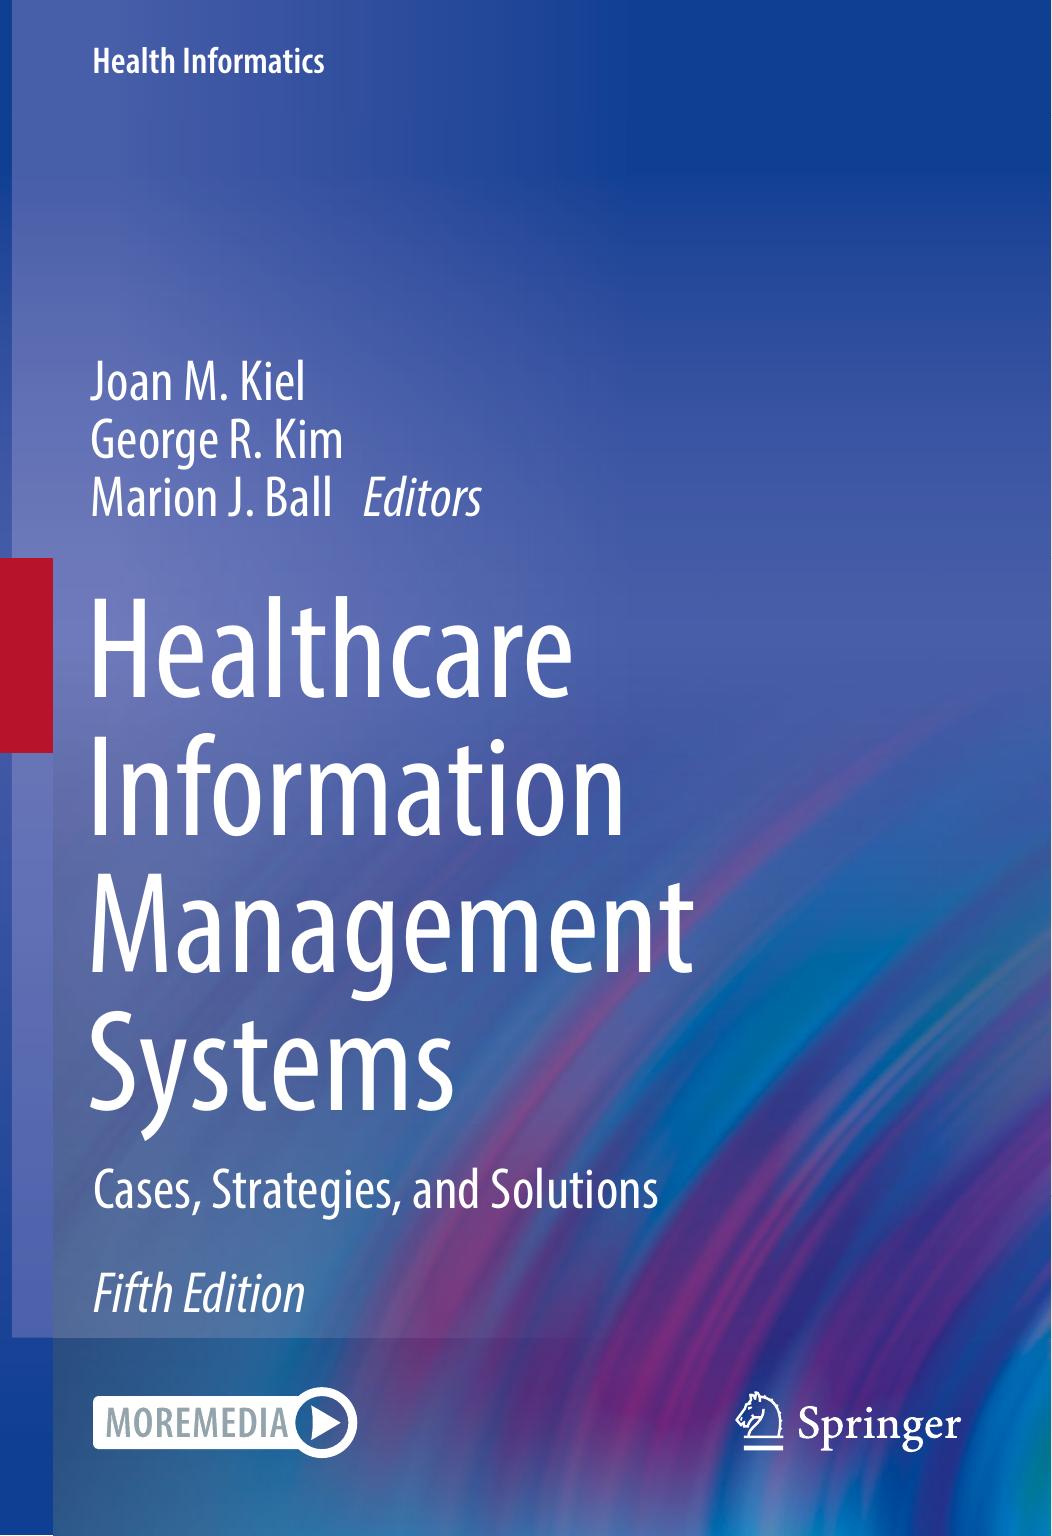 Healthcare Information Management Systems  Cases, Strategies, and Solutions(2023)